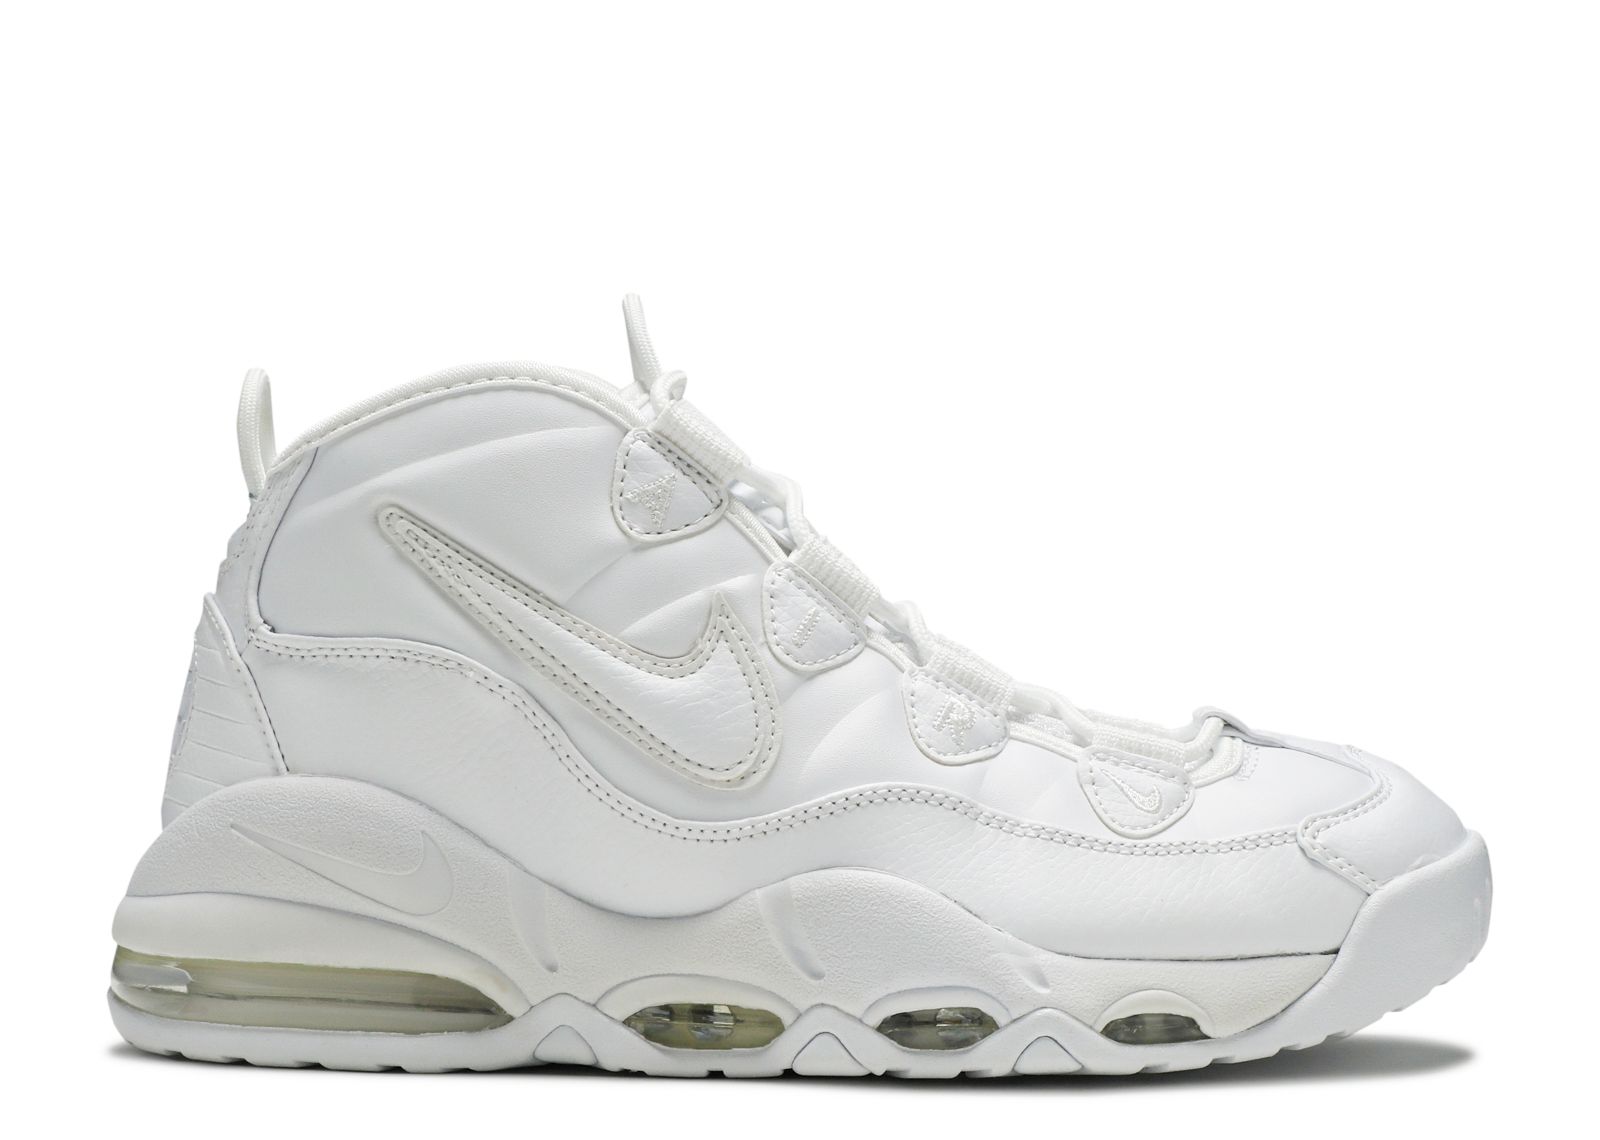 Nike Air Max Uptempo 95 White for Sale, Authenticity Guaranteed